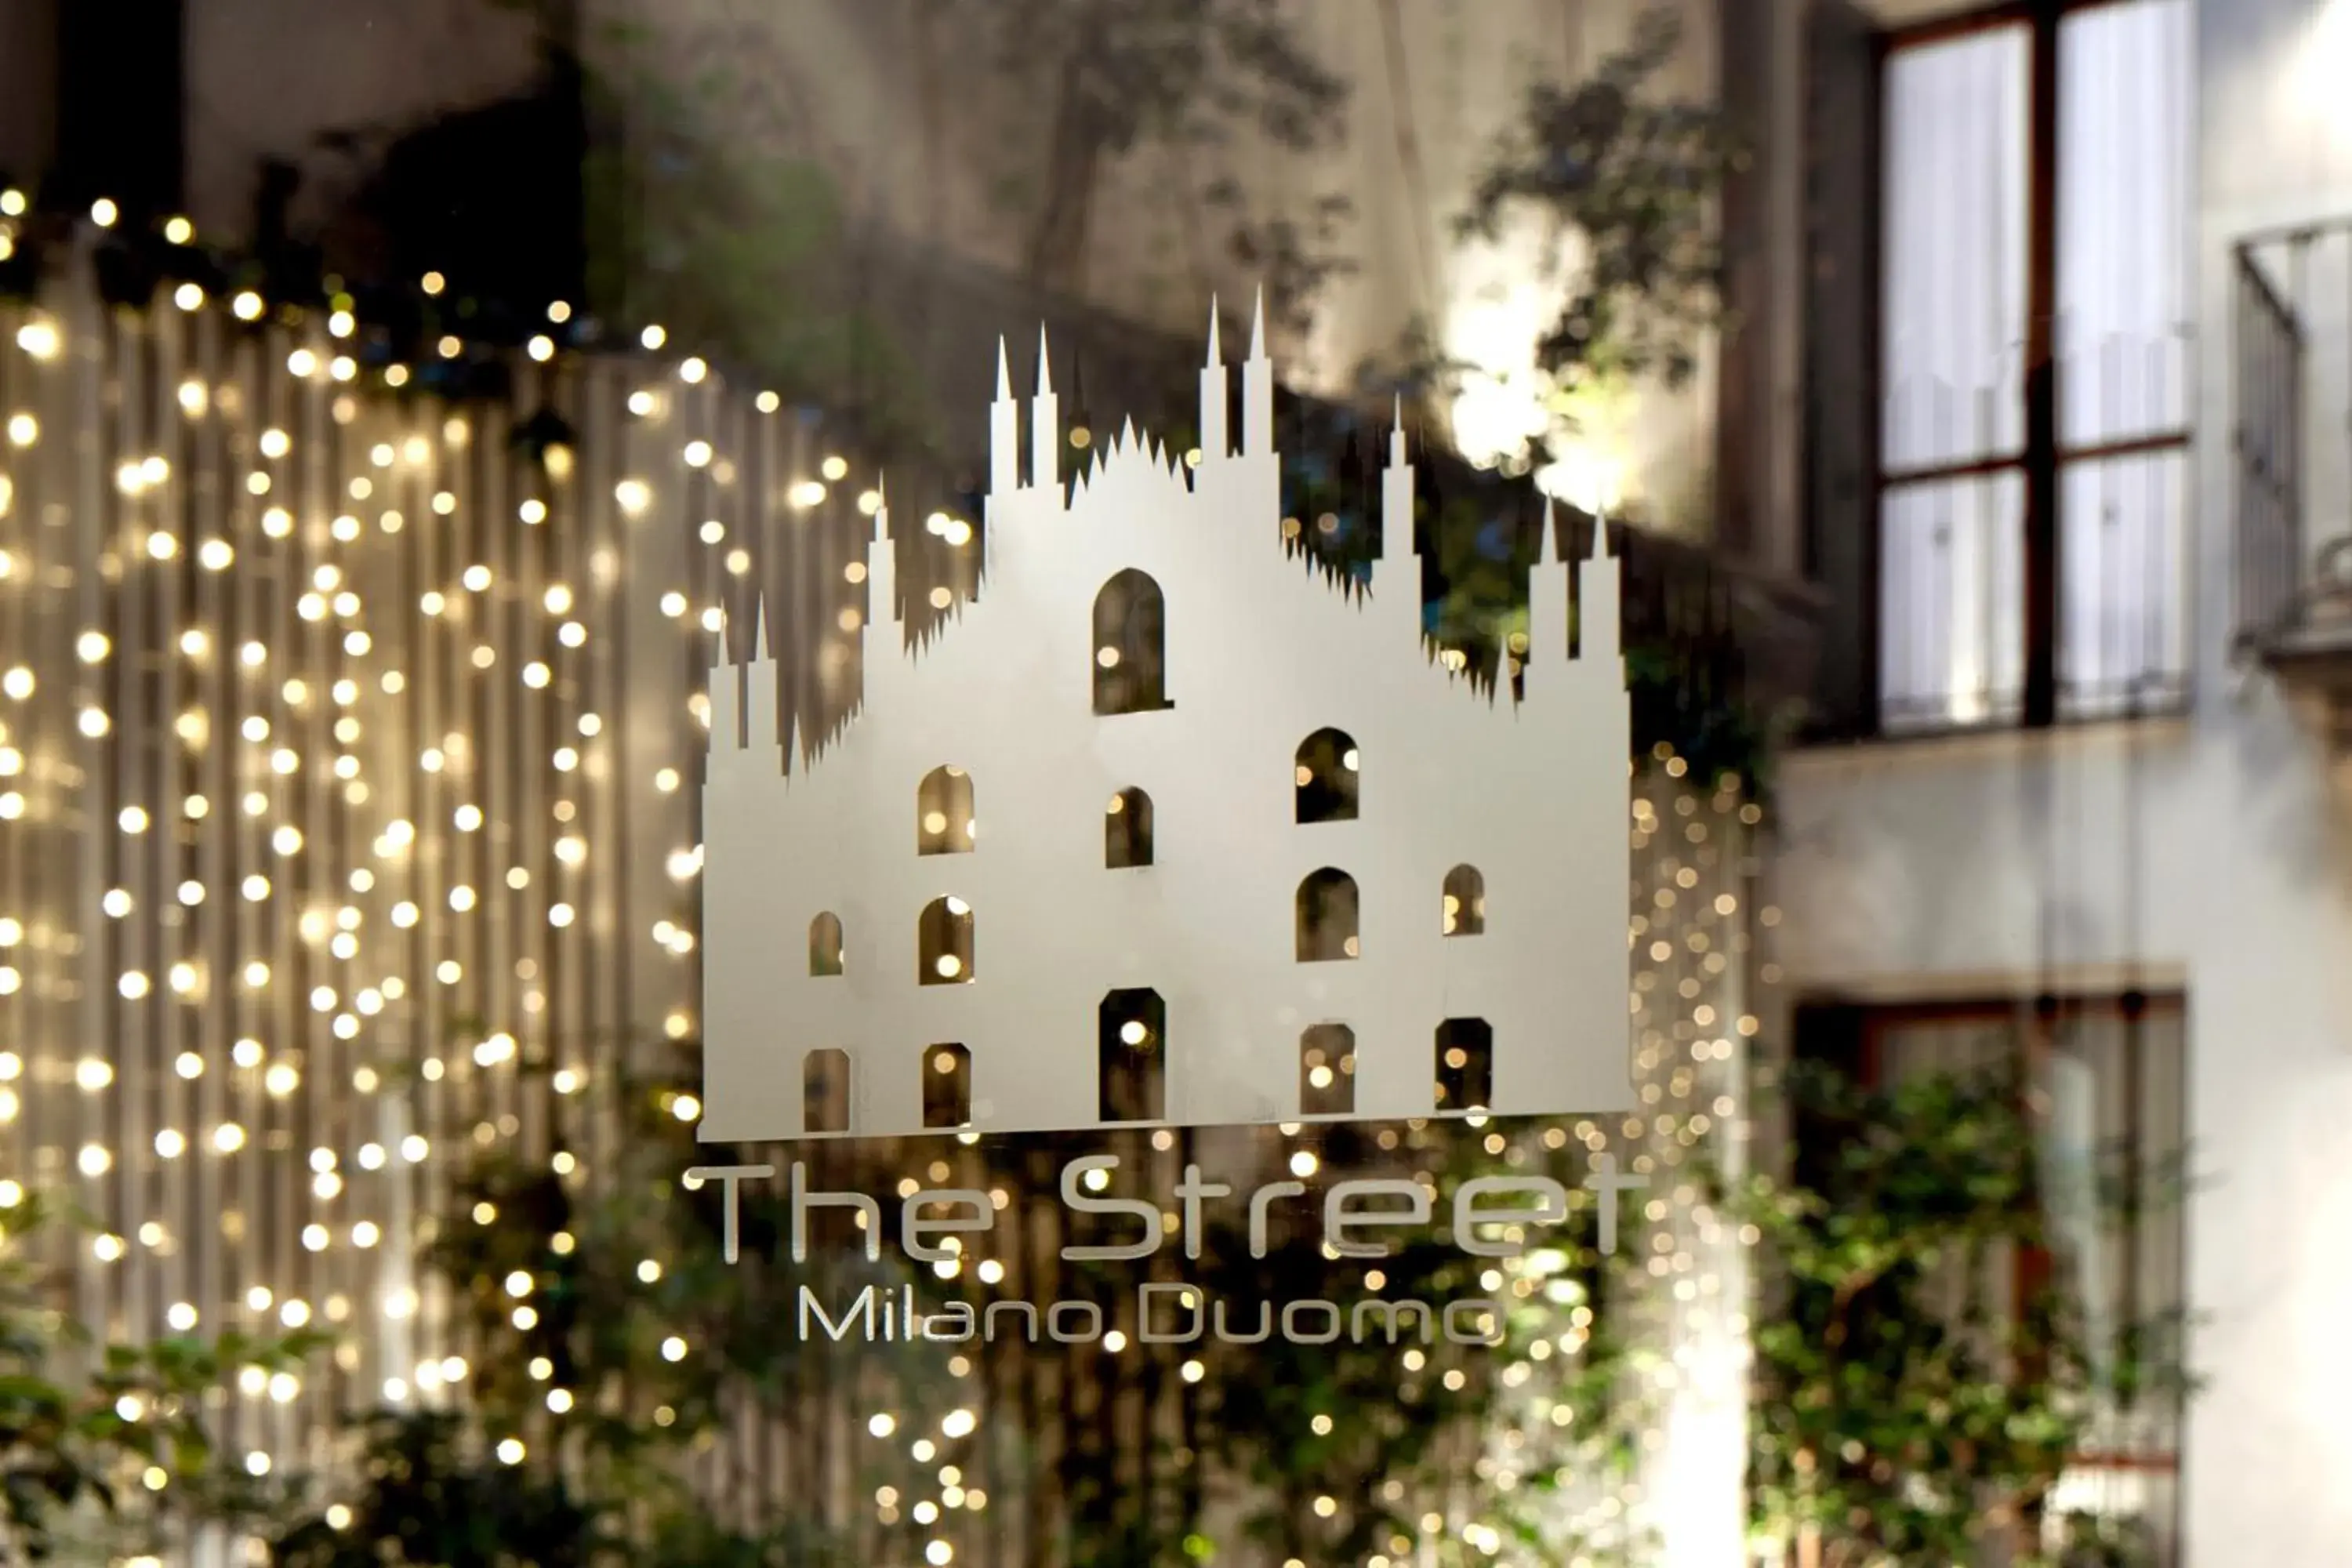 Property logo or sign, Property Building in The Street Milano Duomo | a Design Boutique Hotel